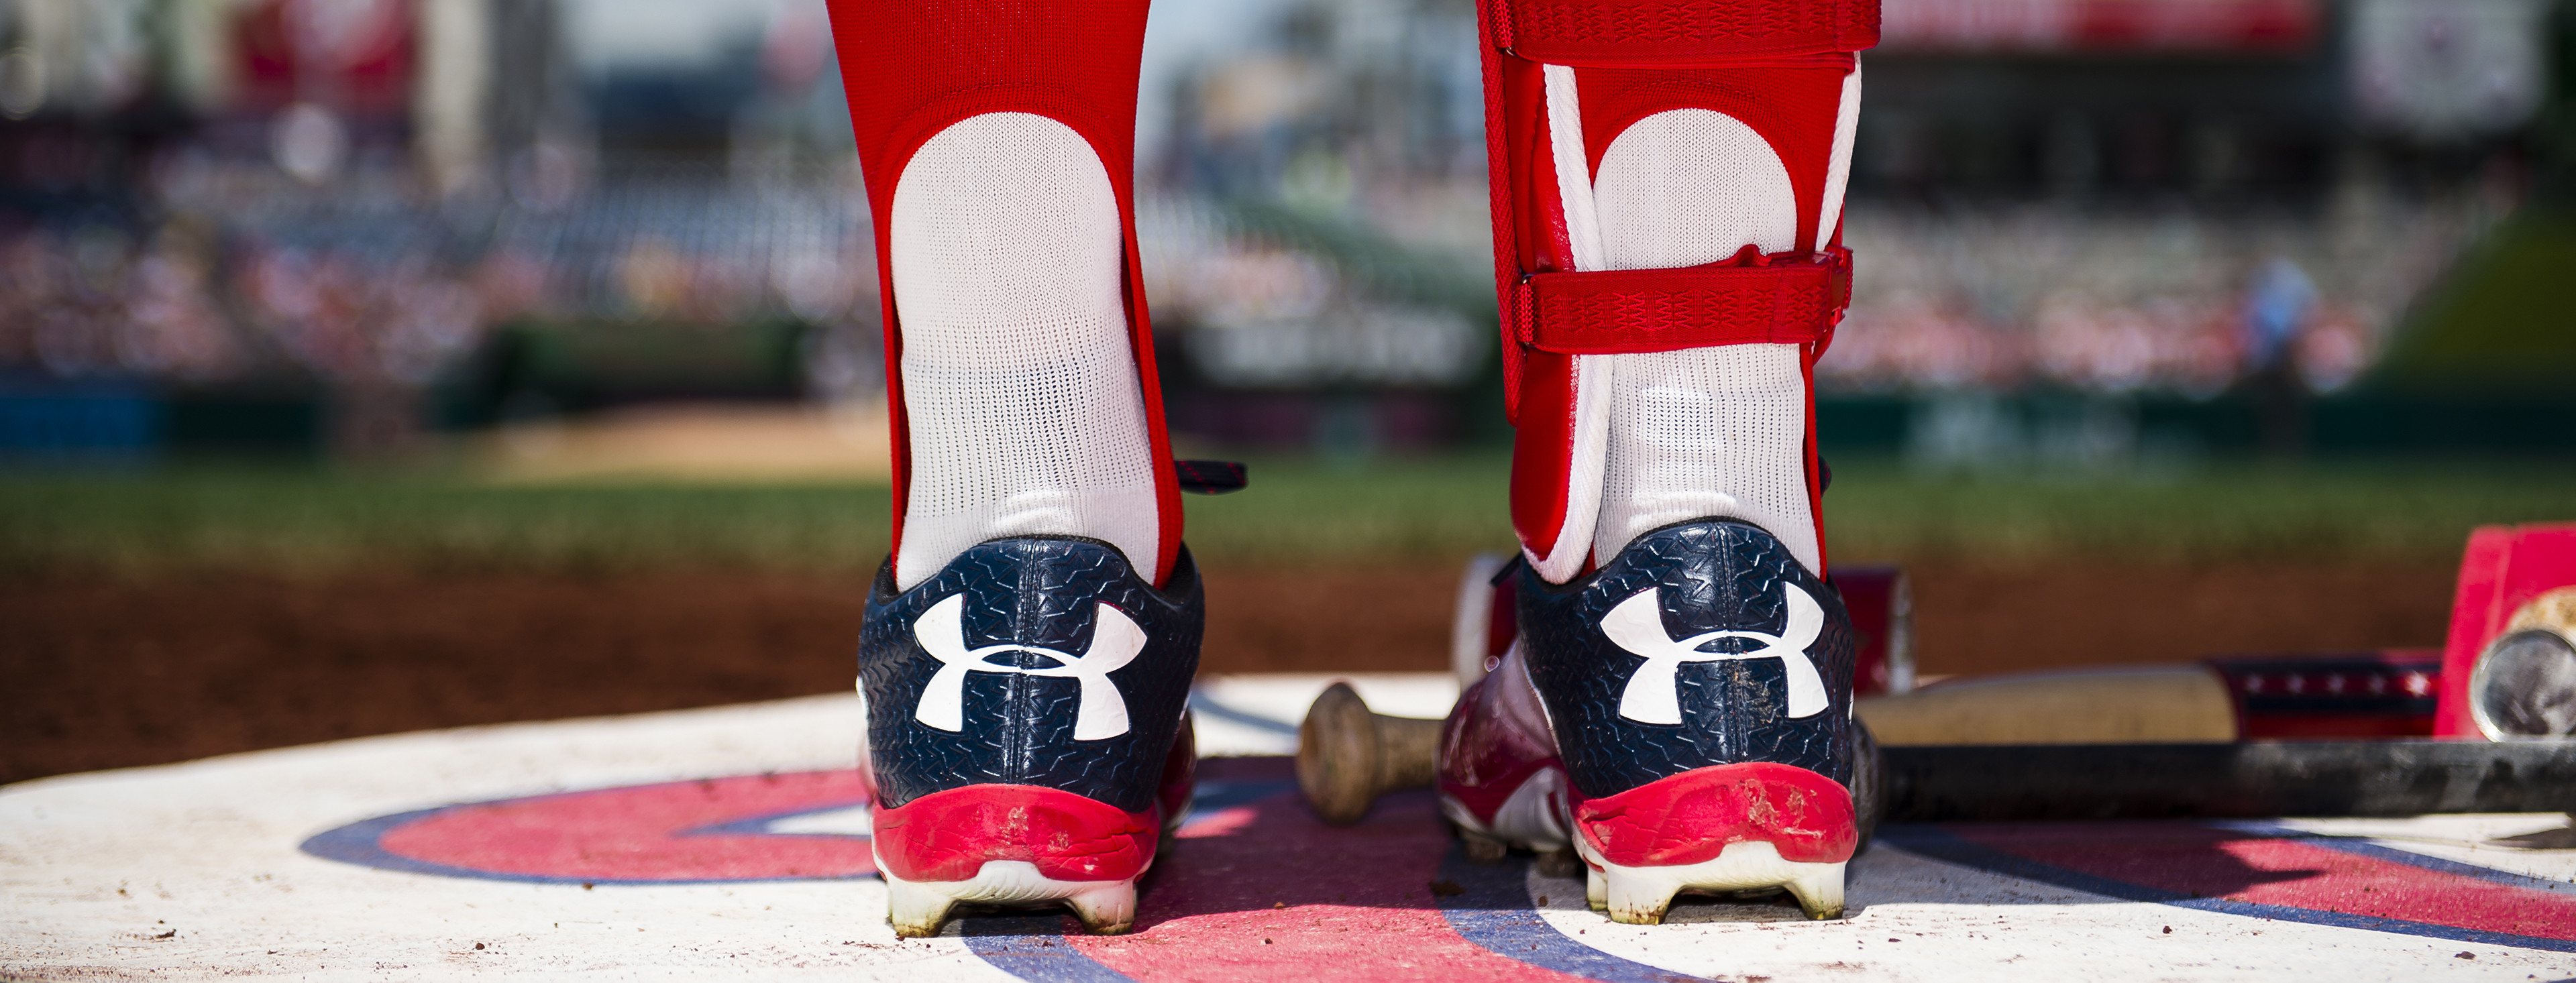 3840x1466 Bryce Harper #34 of the Washington Nationals wears Under Armour shoes in  the first inning